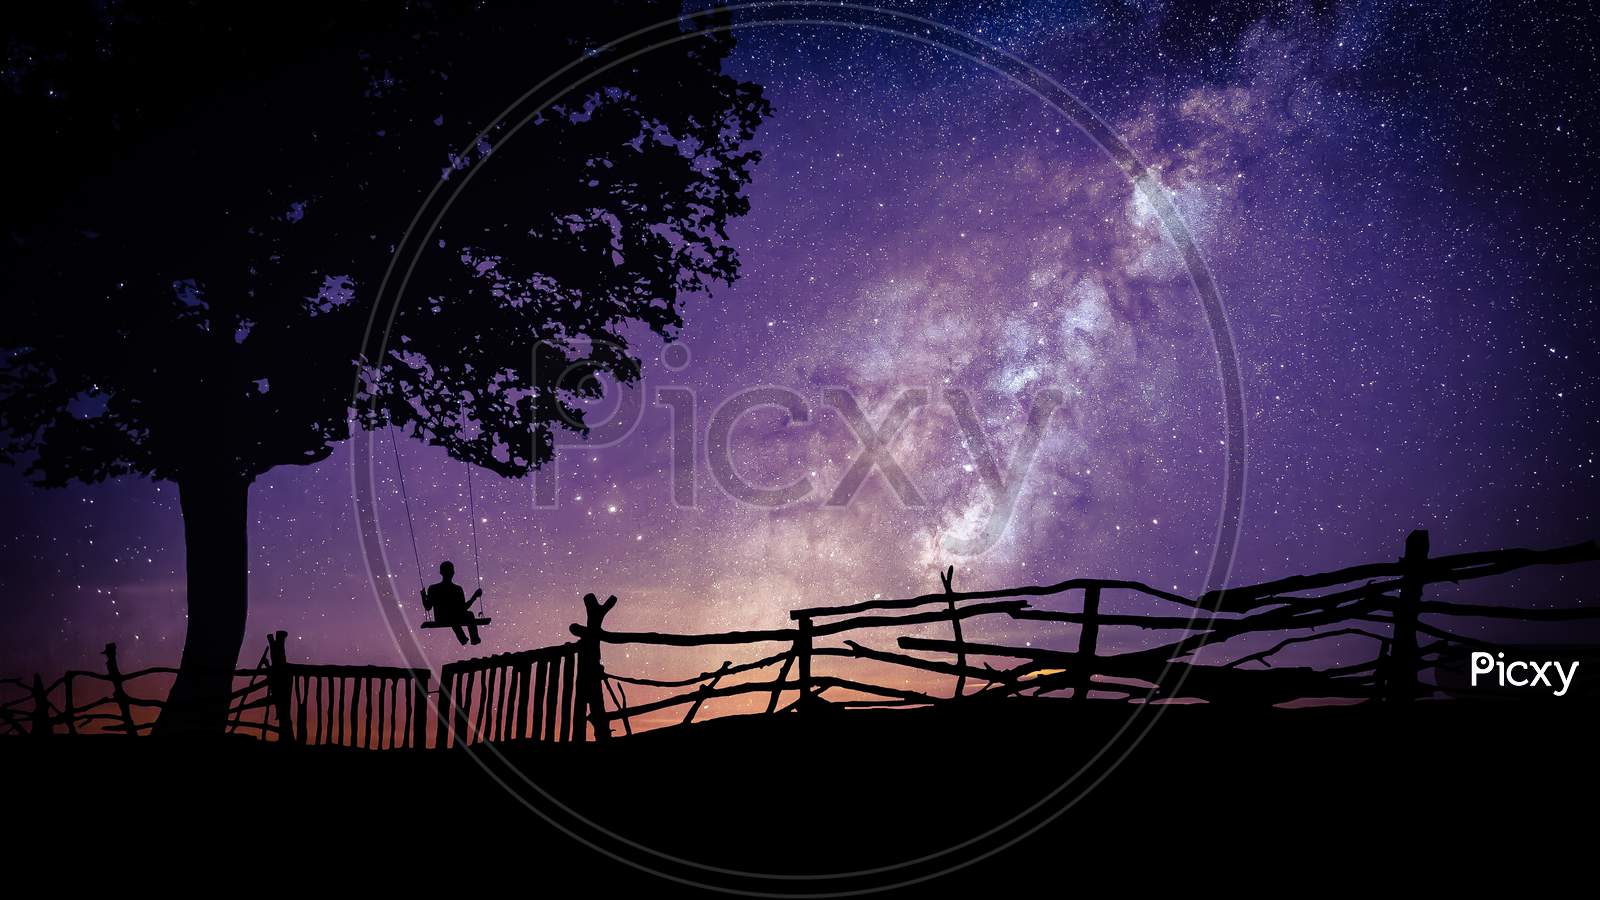 Starry Milky Way sky silhouette with a swinging boy in the tree at night.